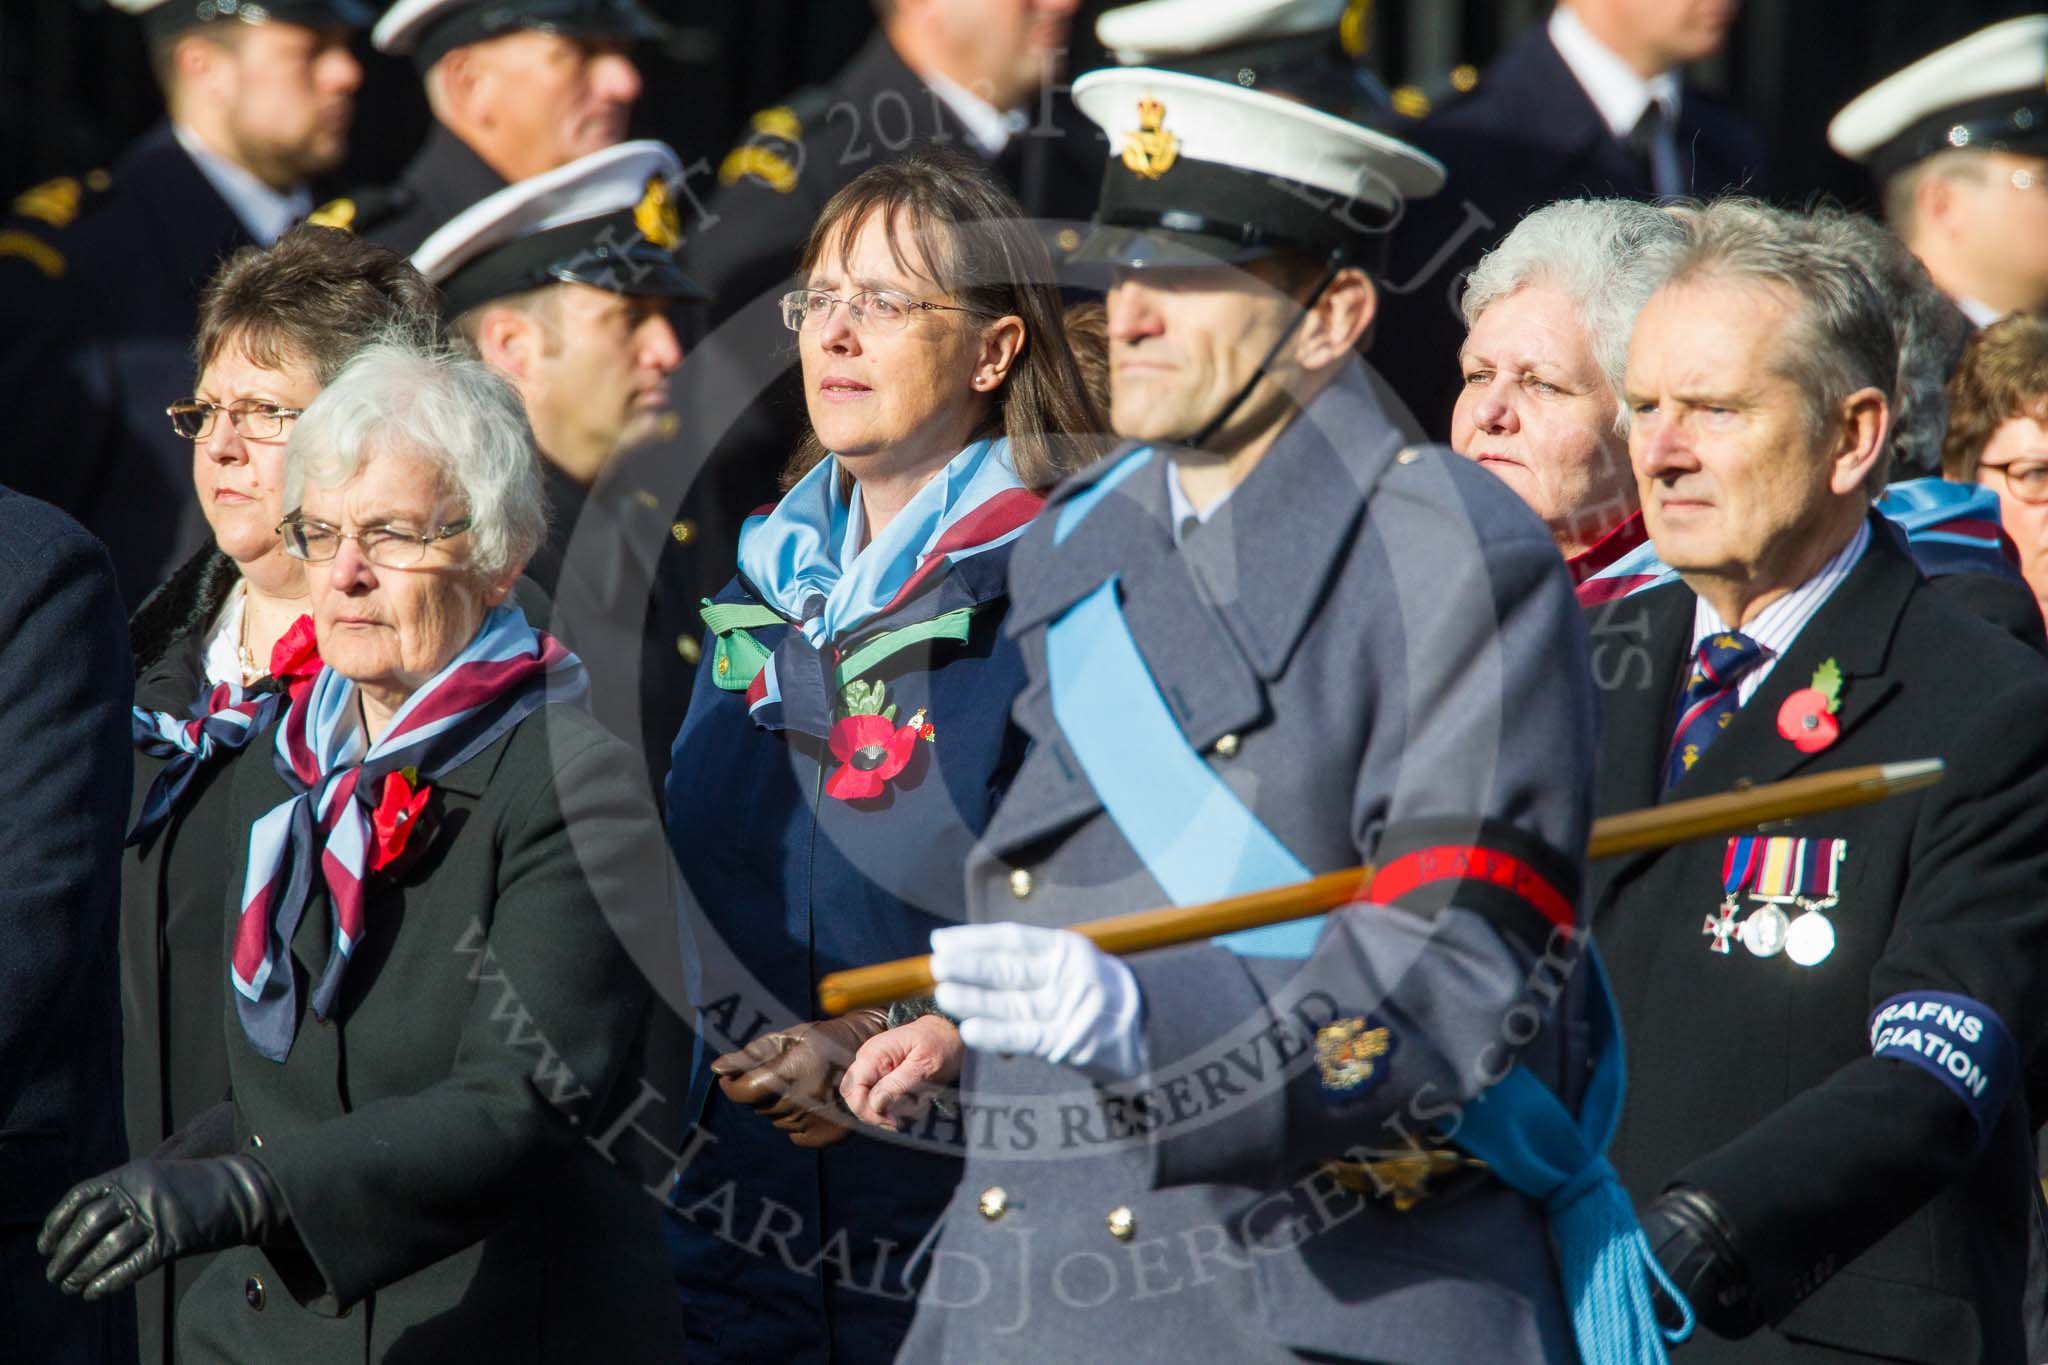 Remembrance Sunday at the Cenotaph in London 2014: Group C23 - Princess Mary's Royal Air Force Nursing Service
Association.
Press stand opposite the Foreign Office building, Whitehall, London SW1,
London,
Greater London,
United Kingdom,
on 09 November 2014 at 11:41, image #192